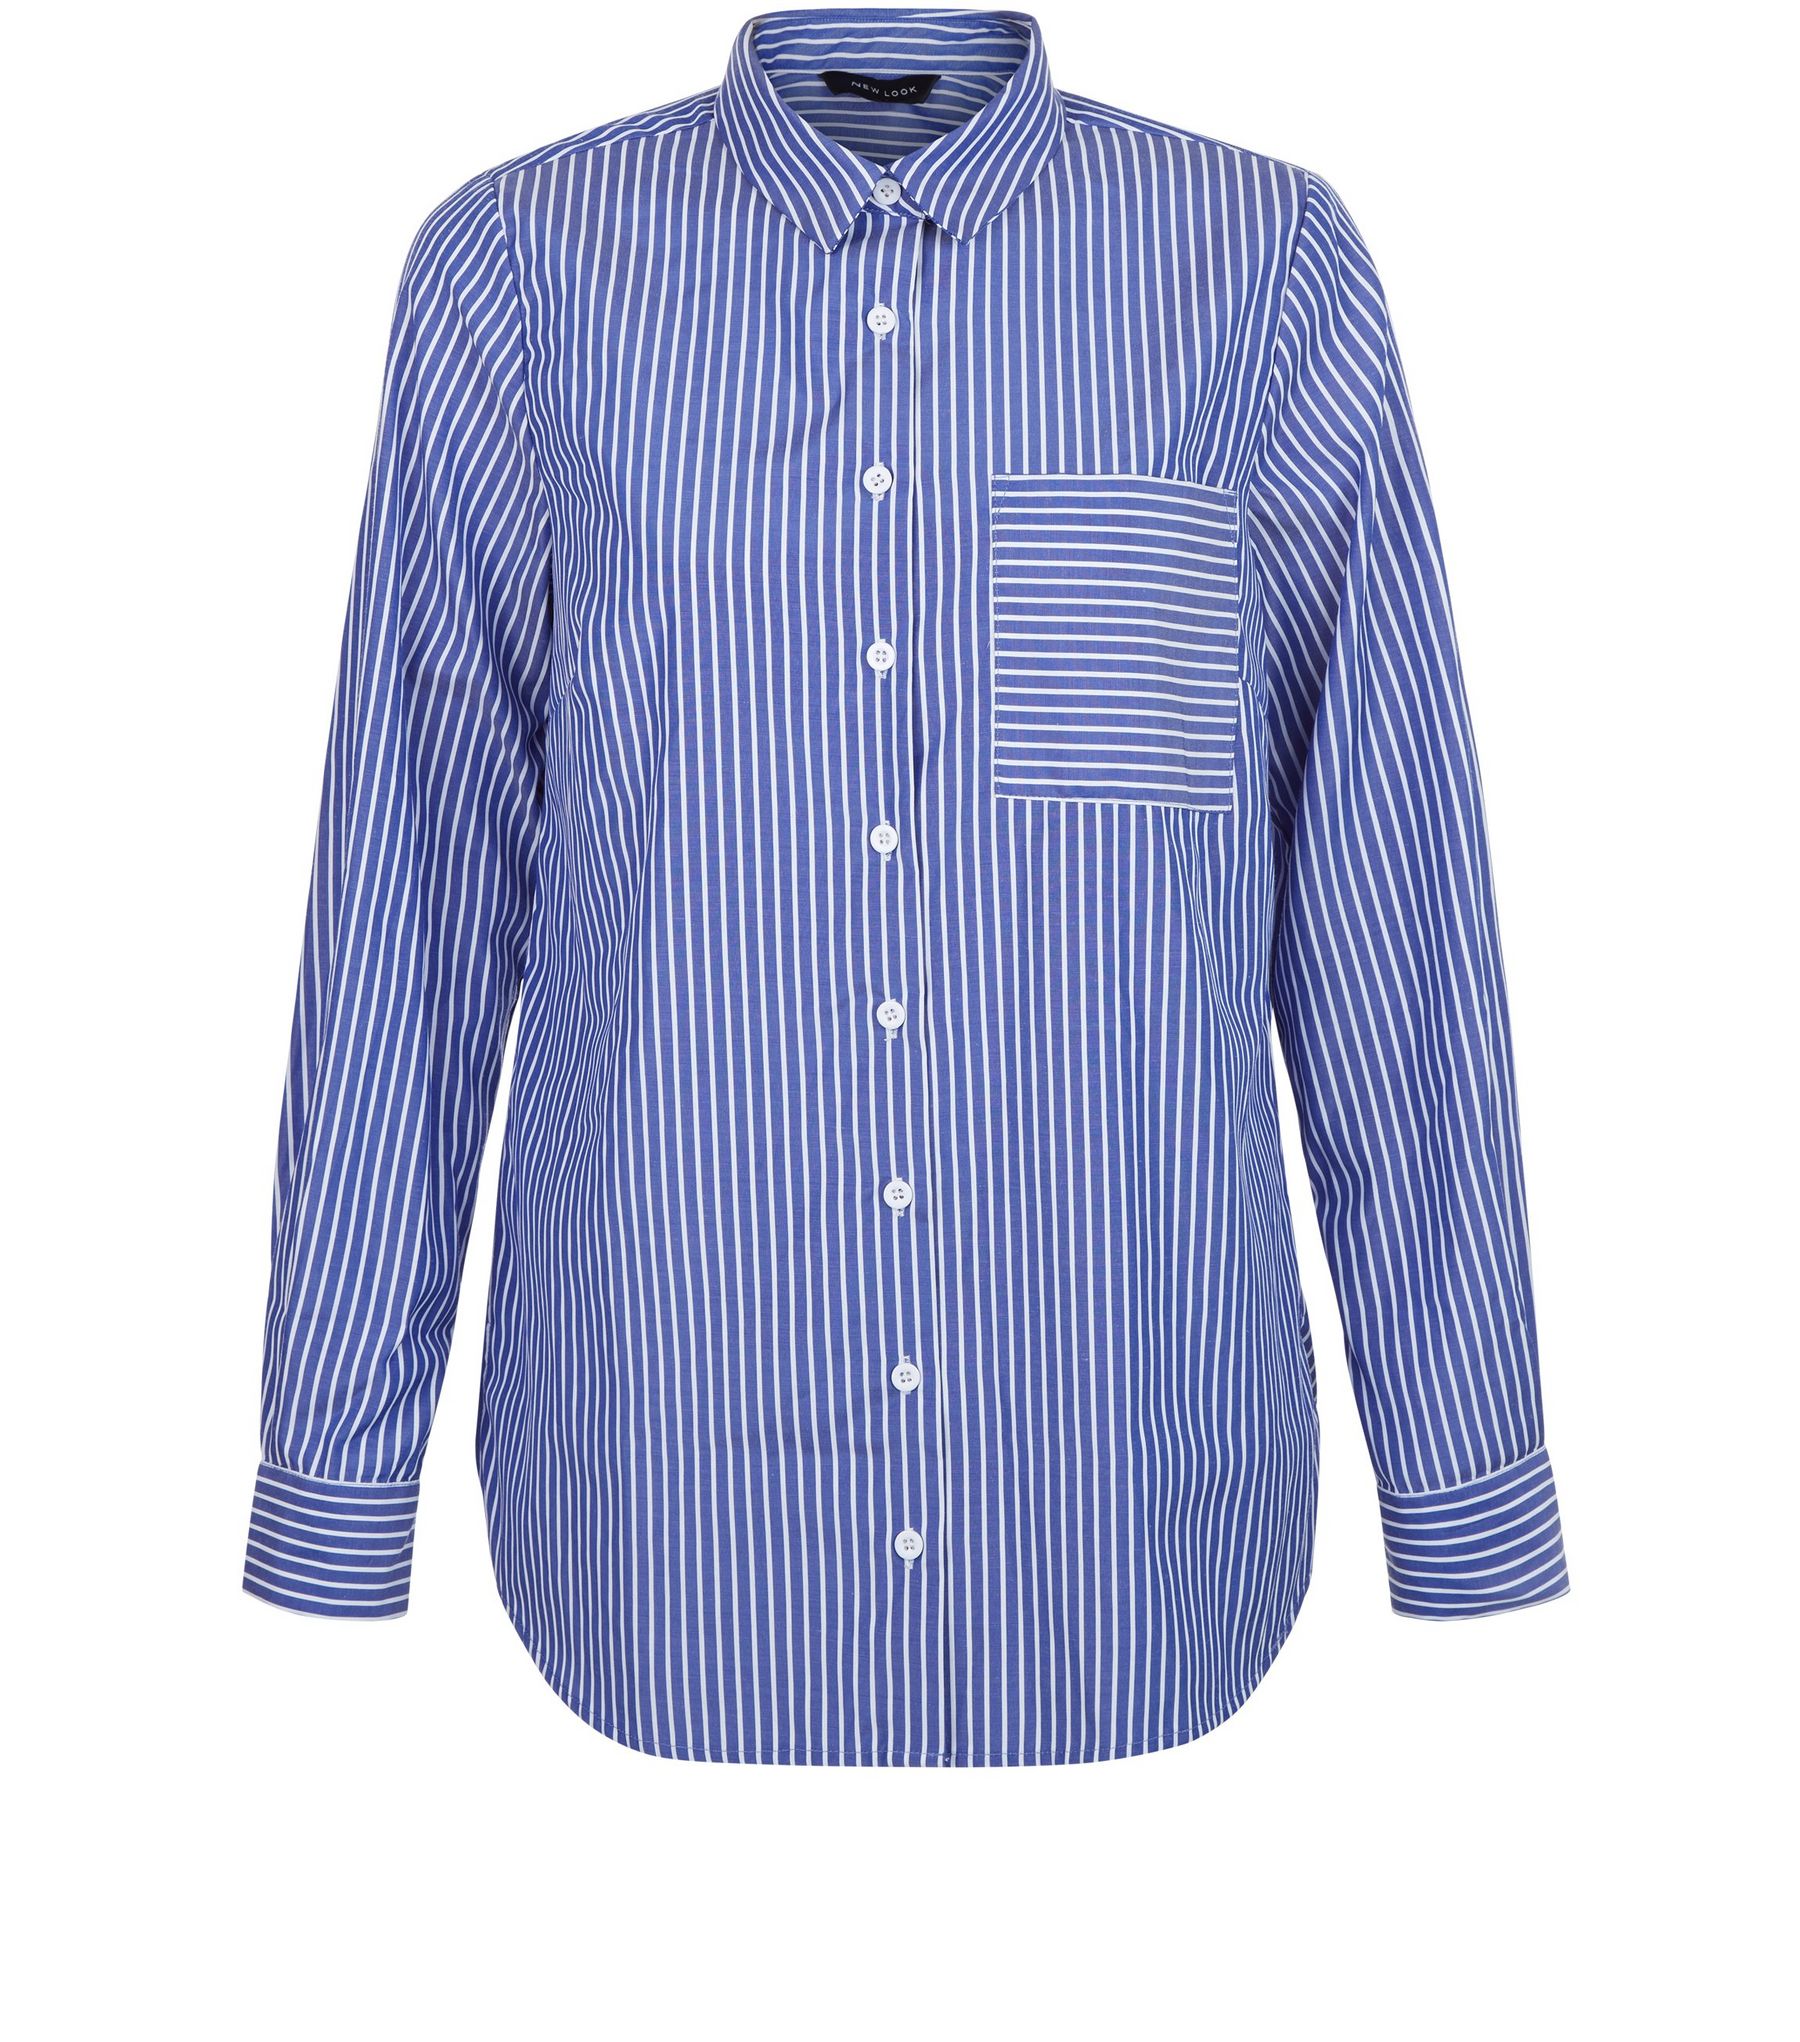 New Look Striped Shirt